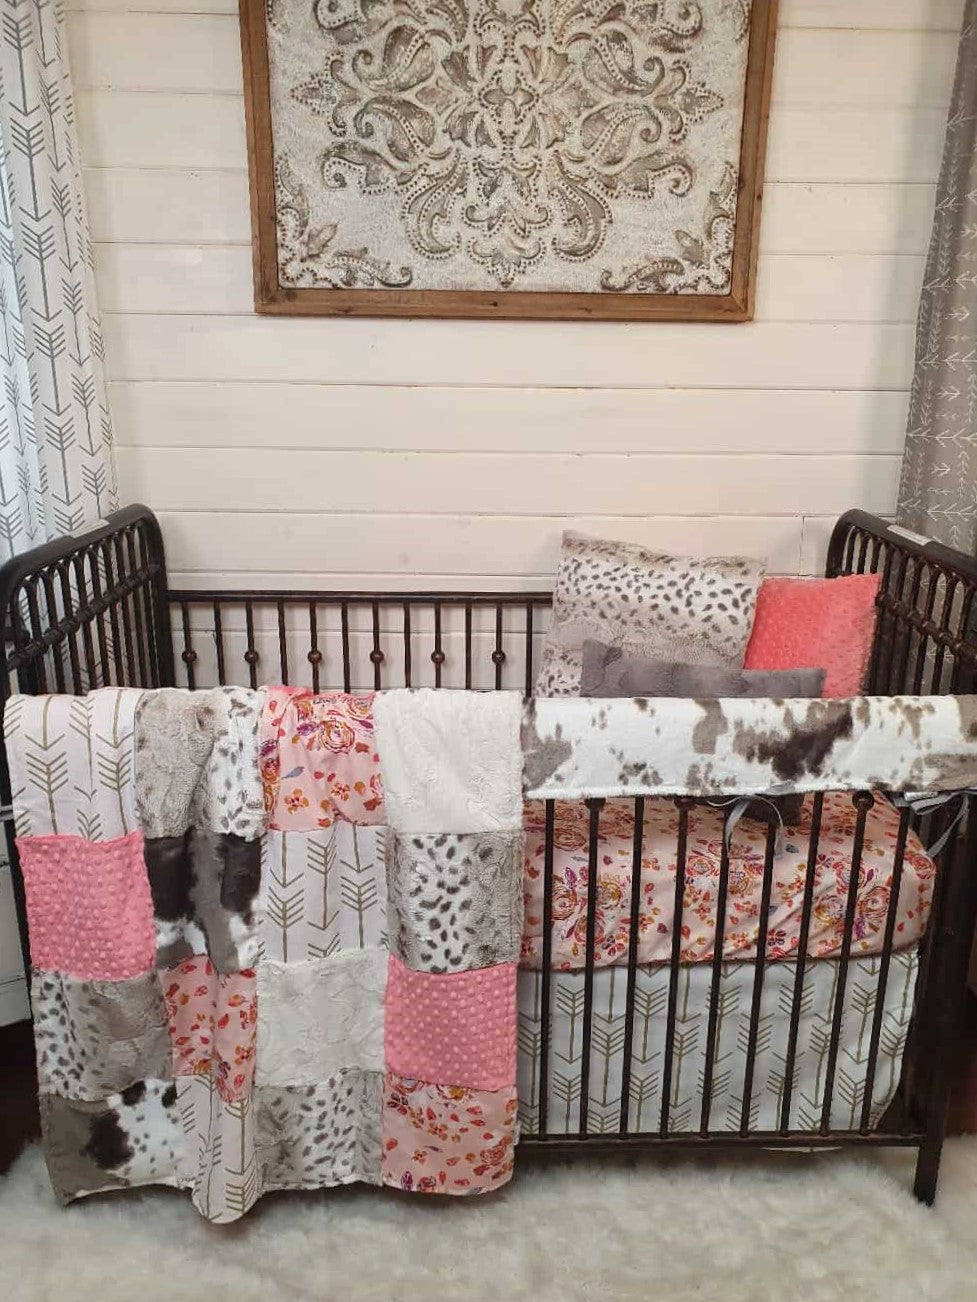 Girl Crib Bedding - Blush Summer Floral and Brown Sugar Cow Minky Ranch Collection - DBC Baby Bedding Co